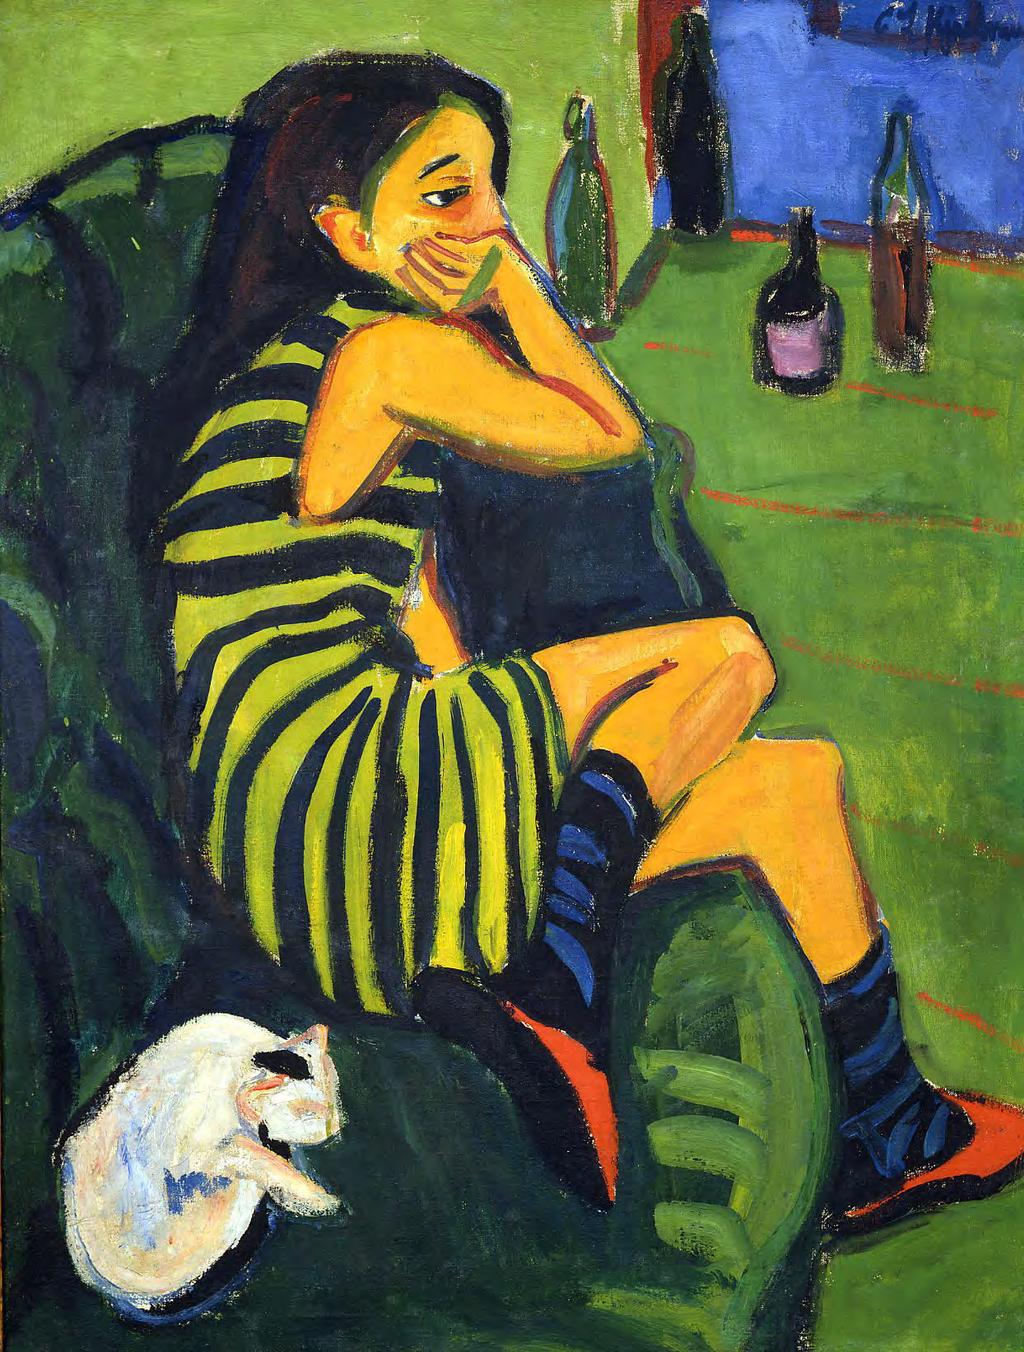 Ernst Ludwig Kirchner The early leader of Die Brucke Like Van Gogh, he was emotional, sensitive, and suffered from depression. His work was declared degenerate in 1937.